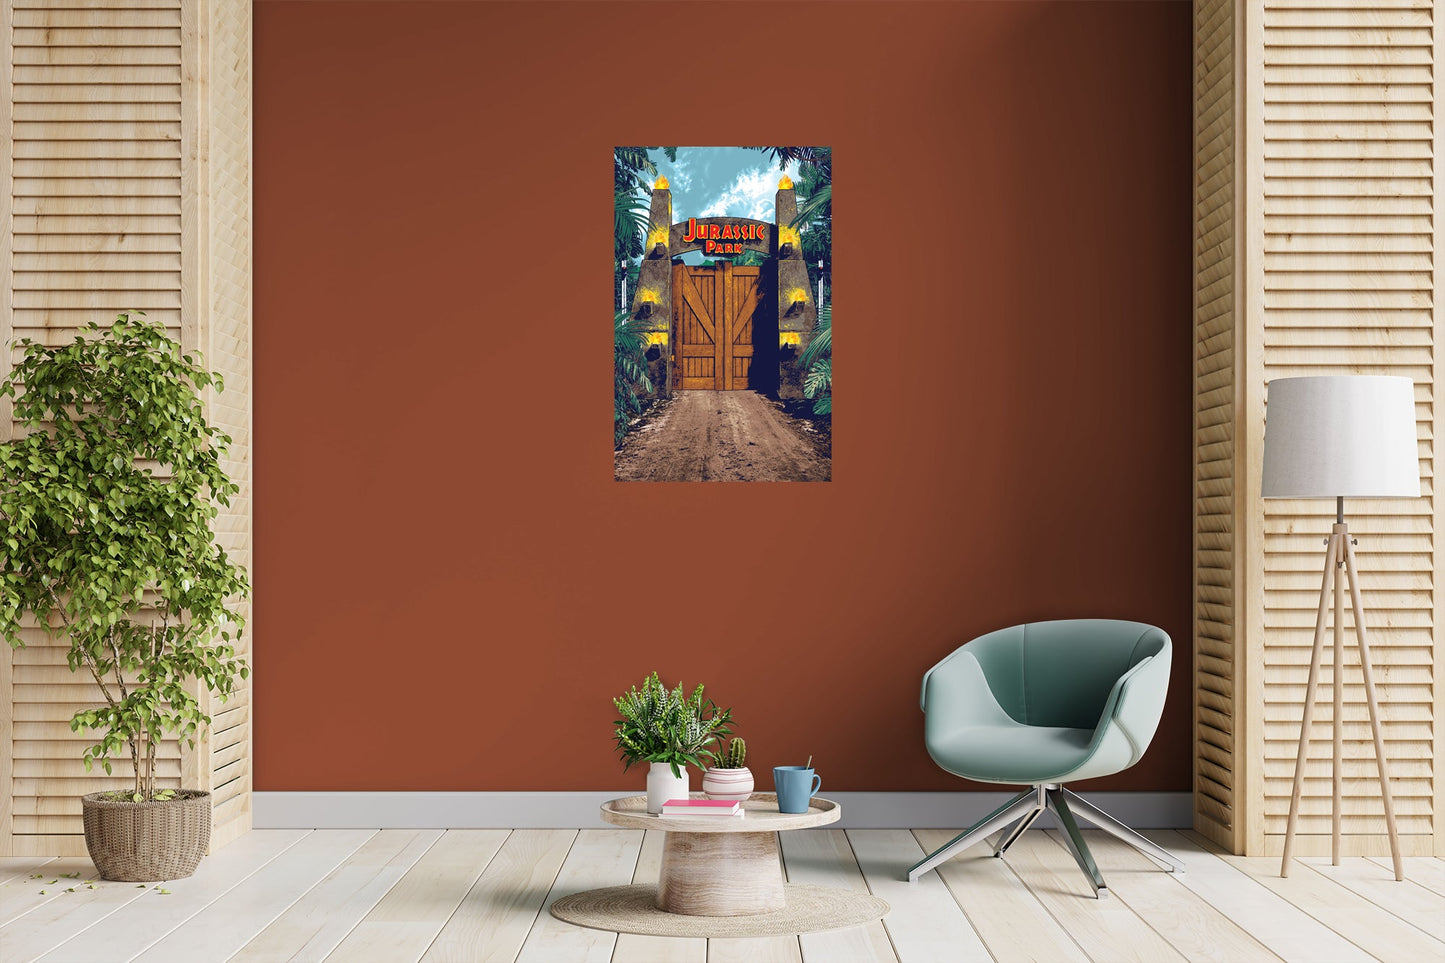 Jurassic Park:  Main Gate Mural        - Officially Licensed NBC Universal Removable     Adhesive Decal